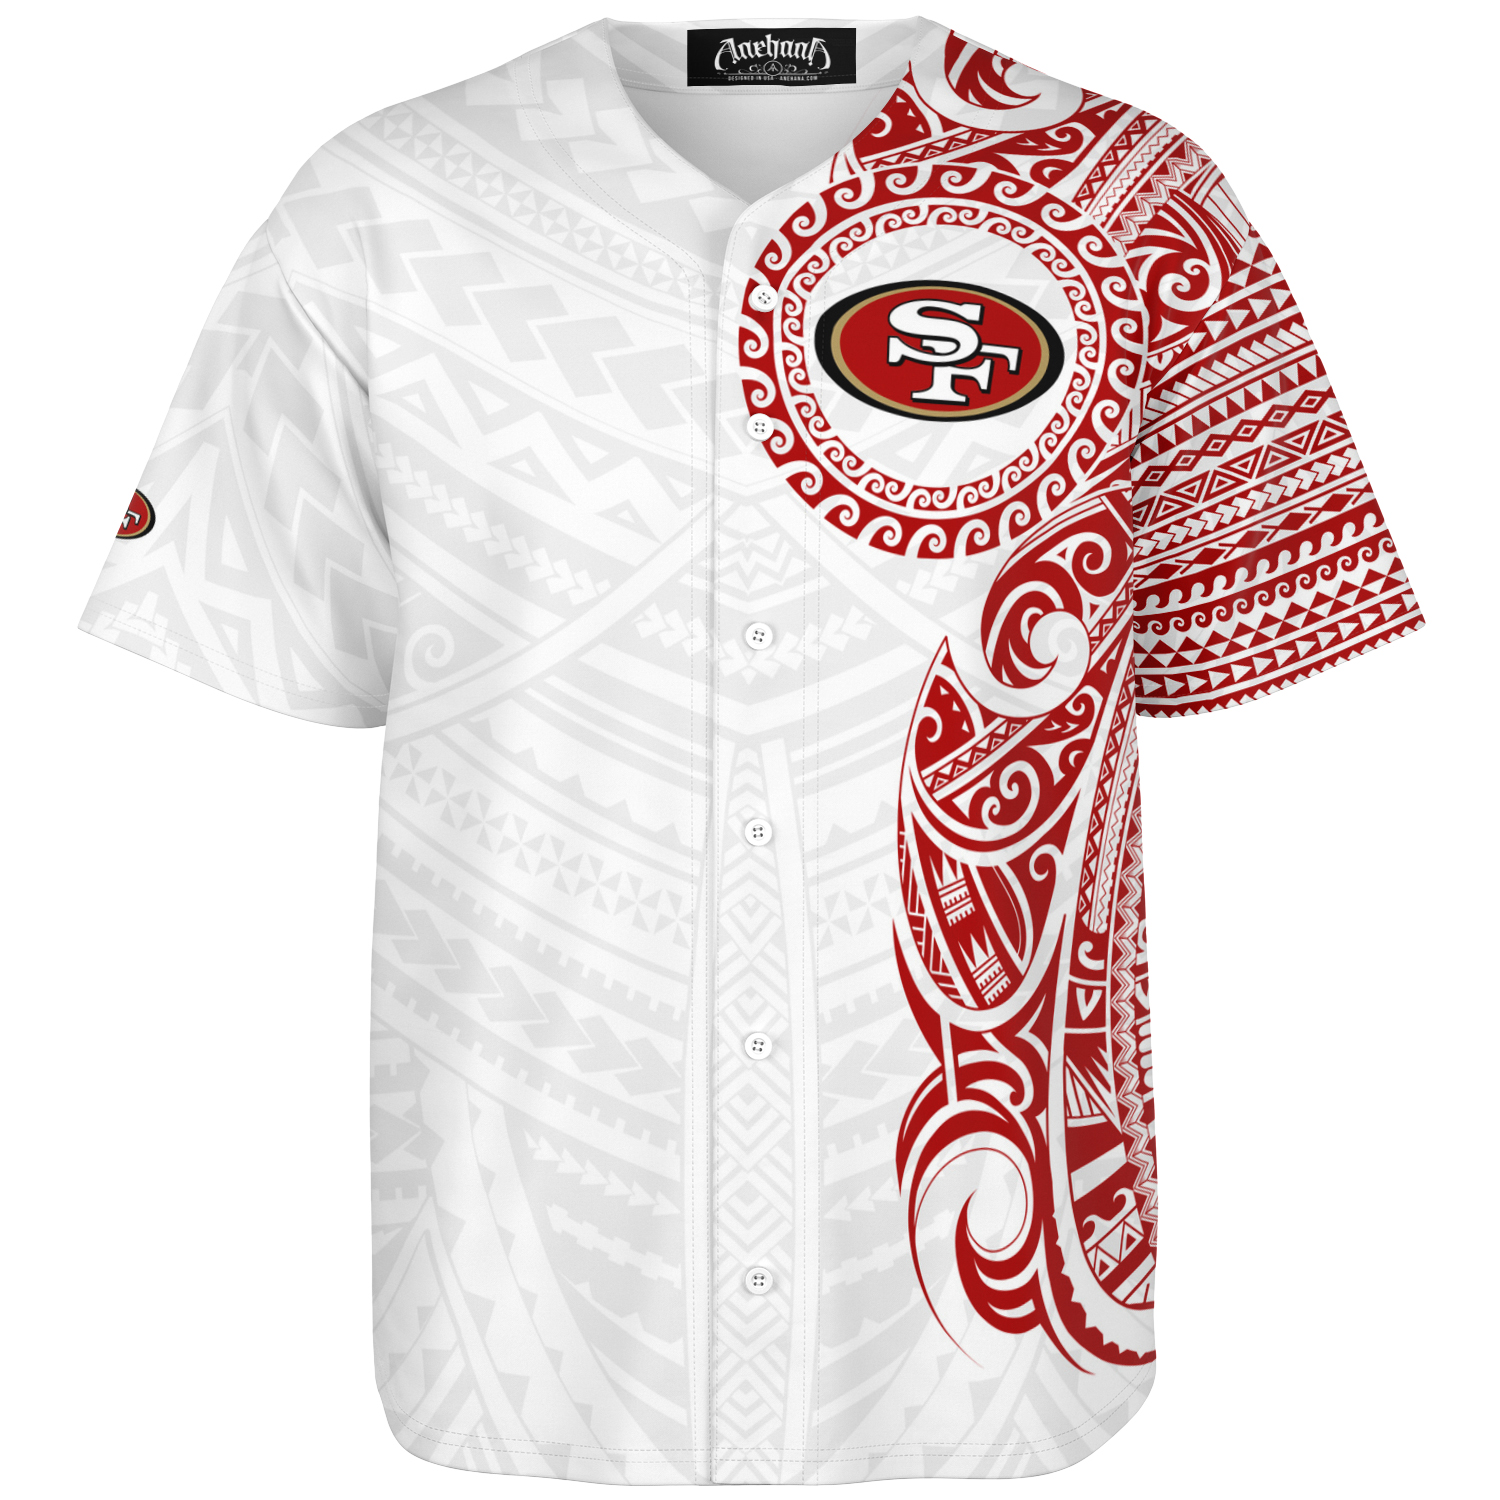 all white 49ers jerseys